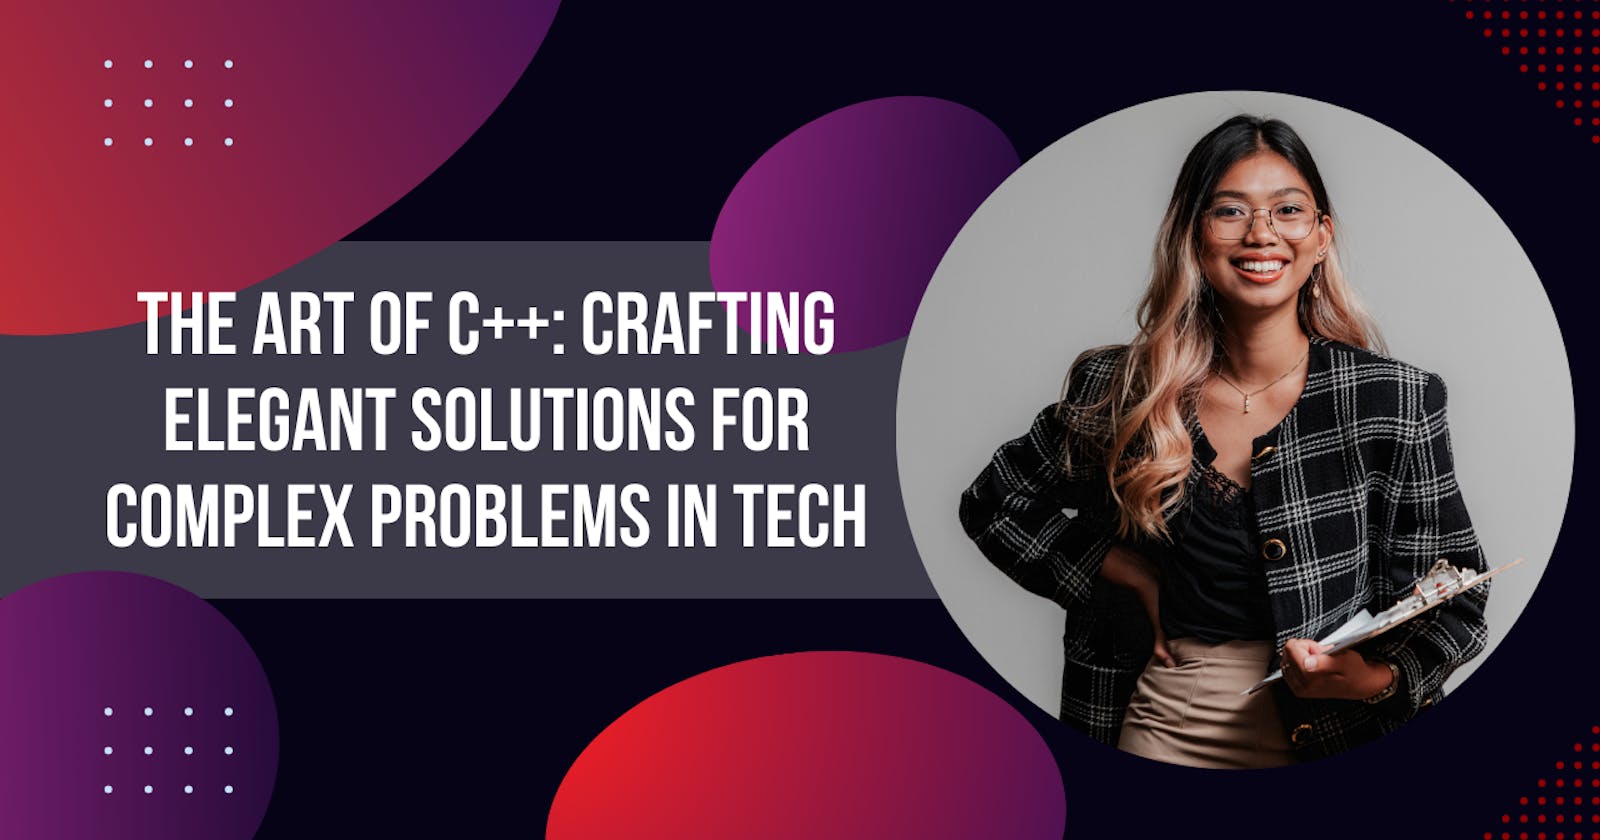 The Art of C++: Crafting Elegant Solutions for Complex Problems in Tech